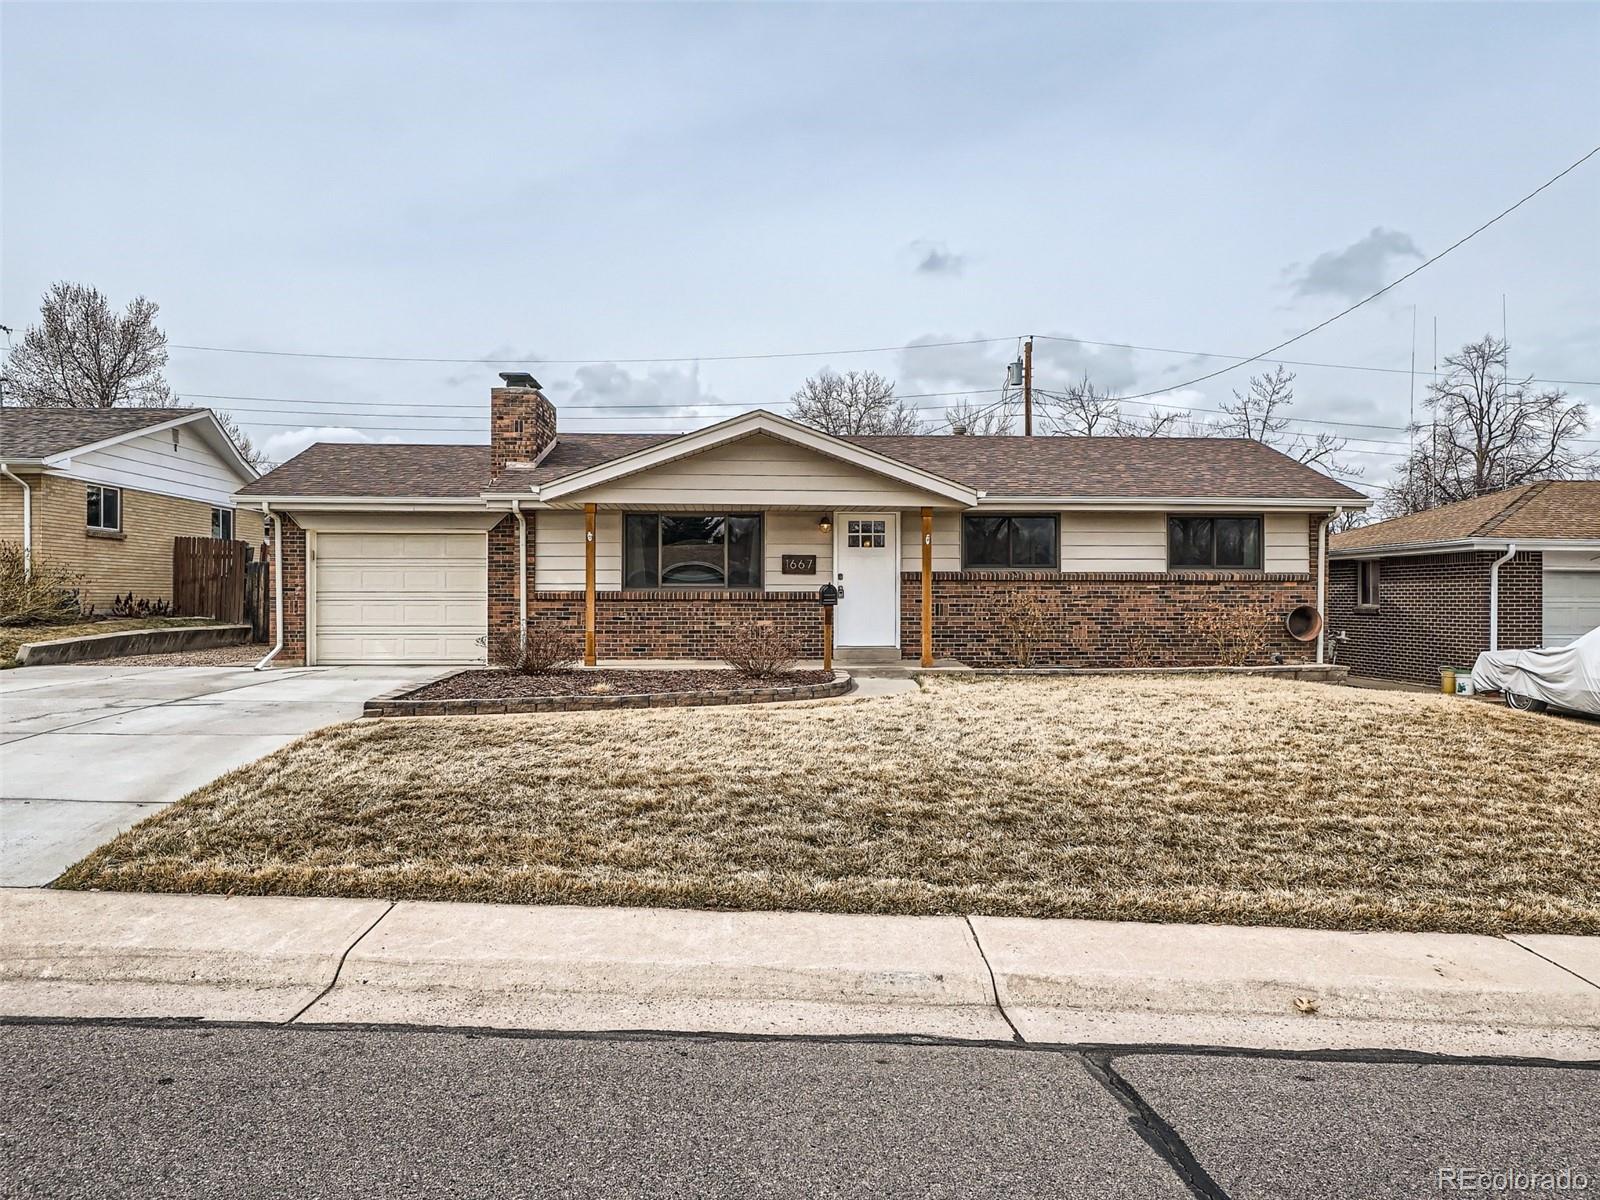 Report Image for 1667 S Balsam Court,Lakewood, Colorado